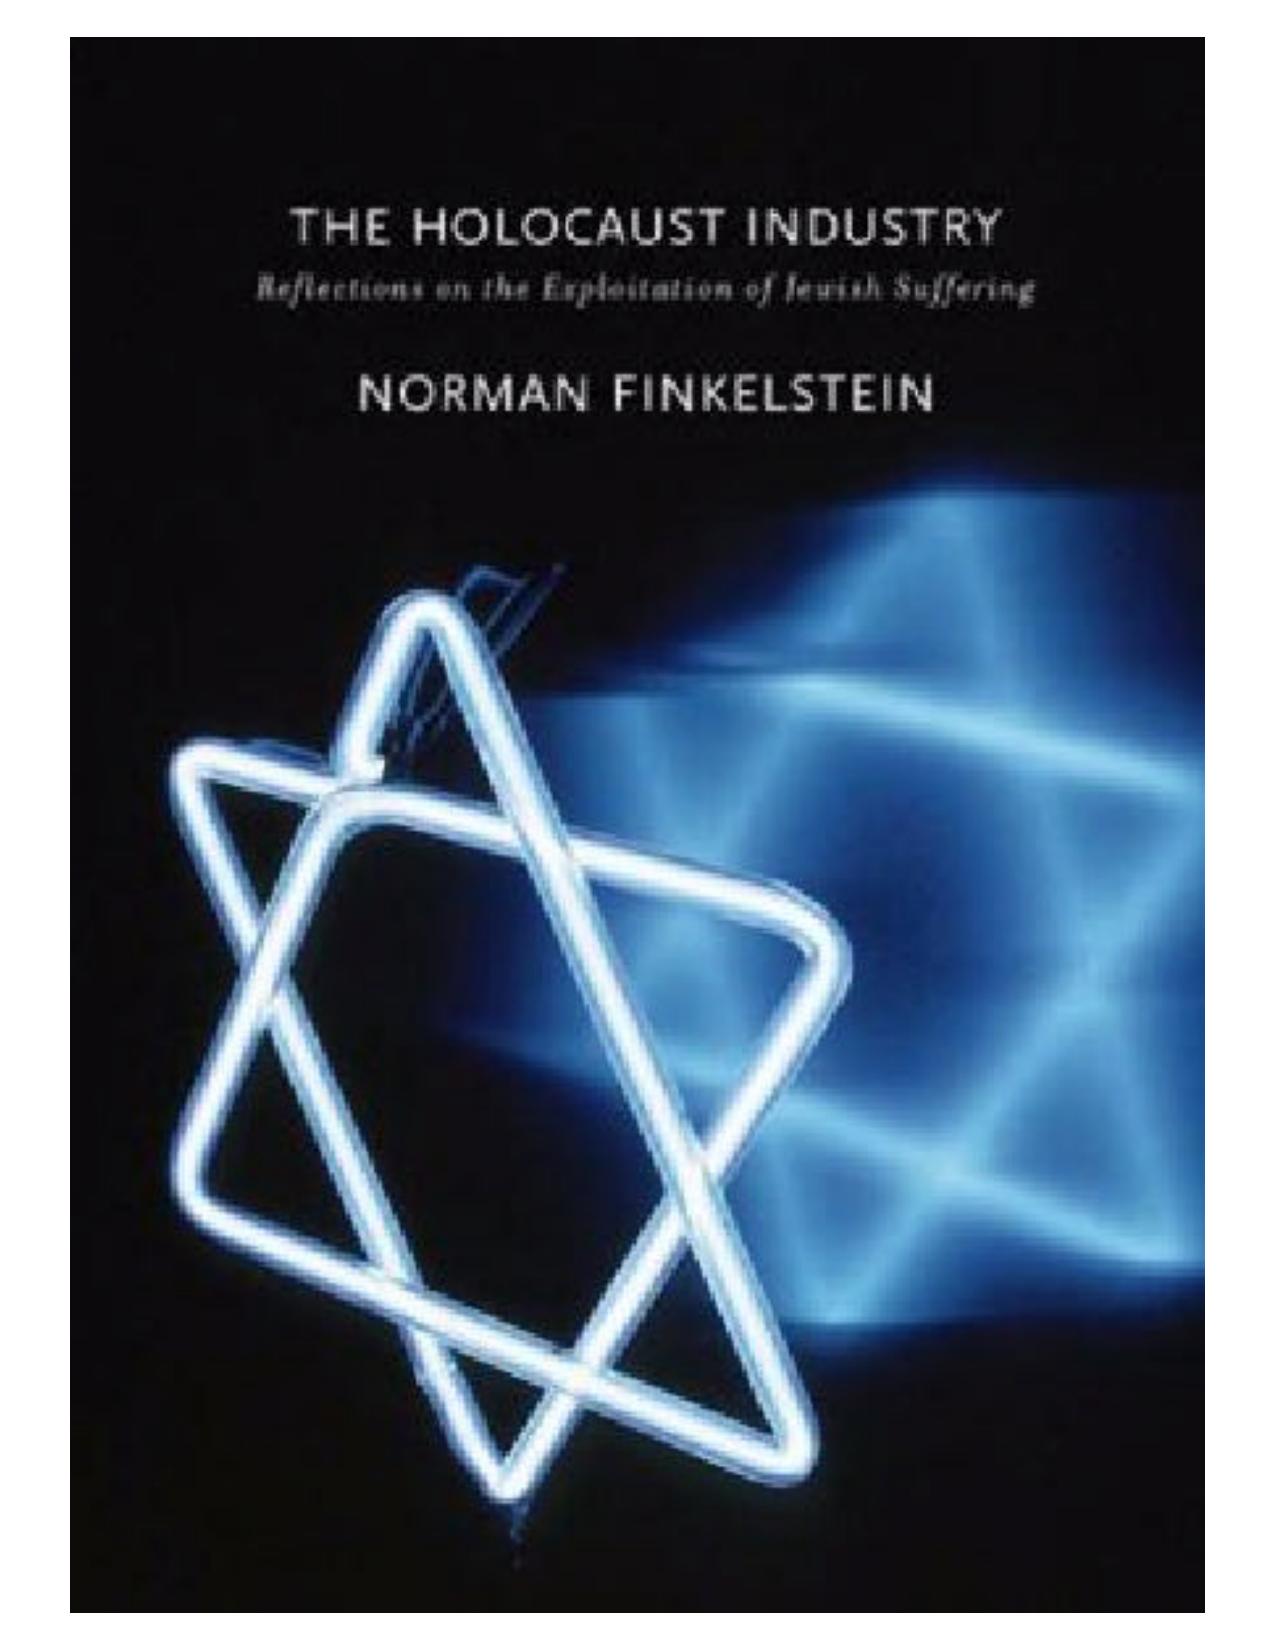 The Holocaust Industry by Norman Finkelstein